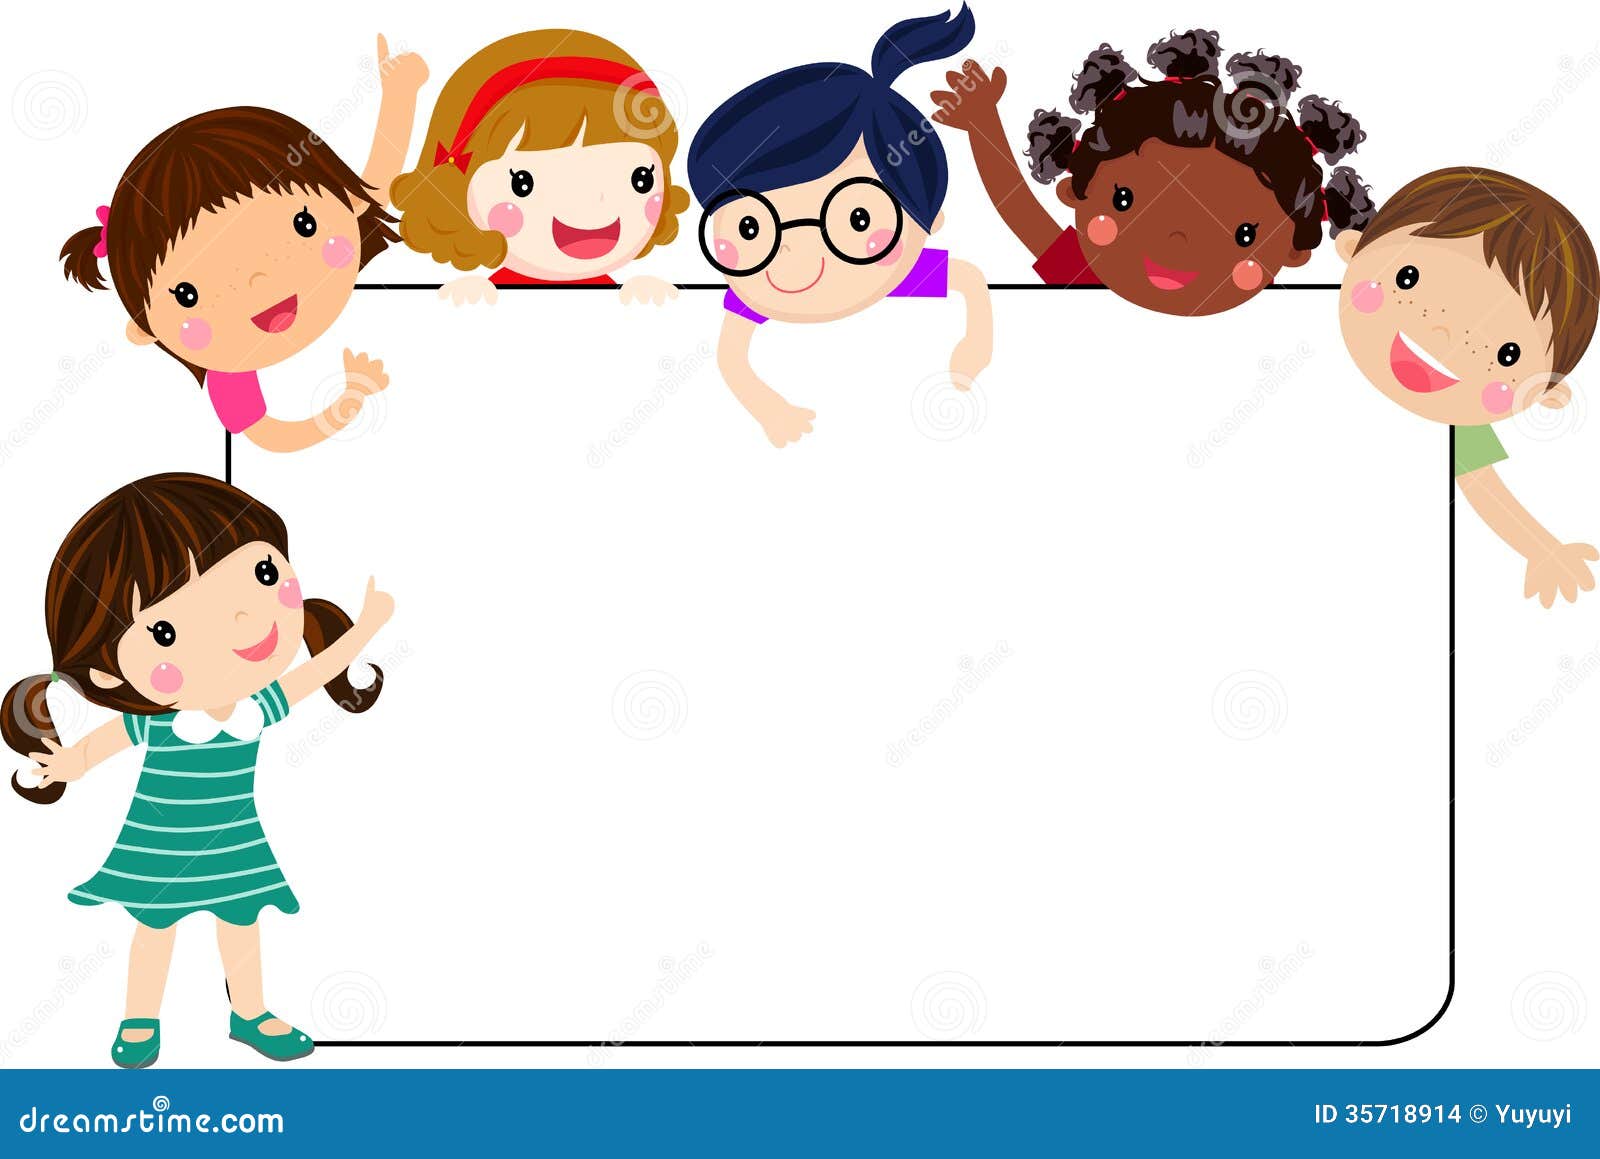 Group of kids and banner stock vector. Illustration of cartoon - 35718914